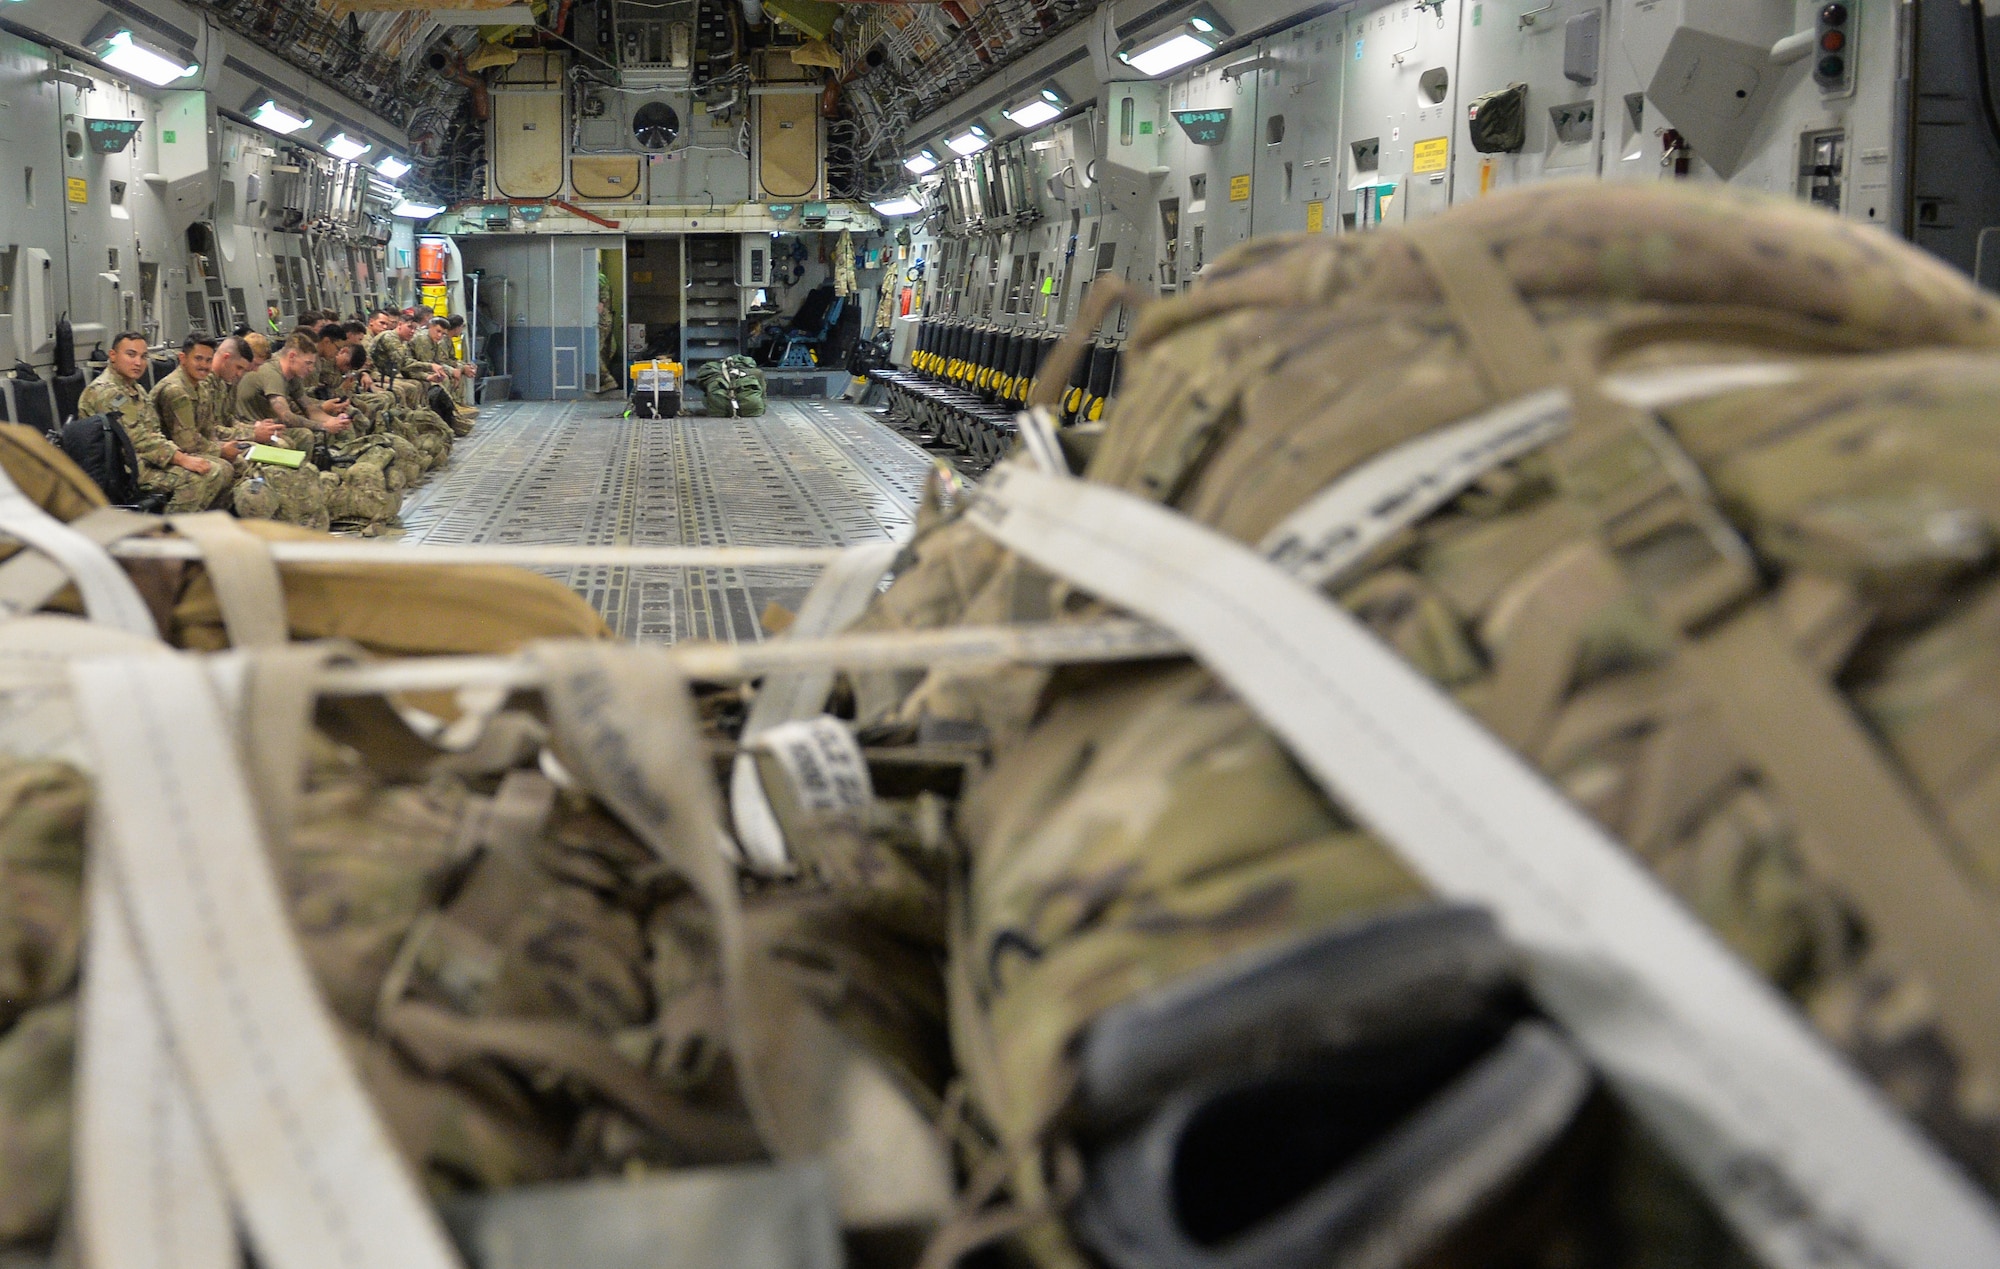 U.S. Army Soldiers with the 4th Infantry Division, board a C-17 Globemaster III at Prince Sultan Air Base (PSAB), Kingdom of Saudi Arabia (KSA), October 23, 2109.